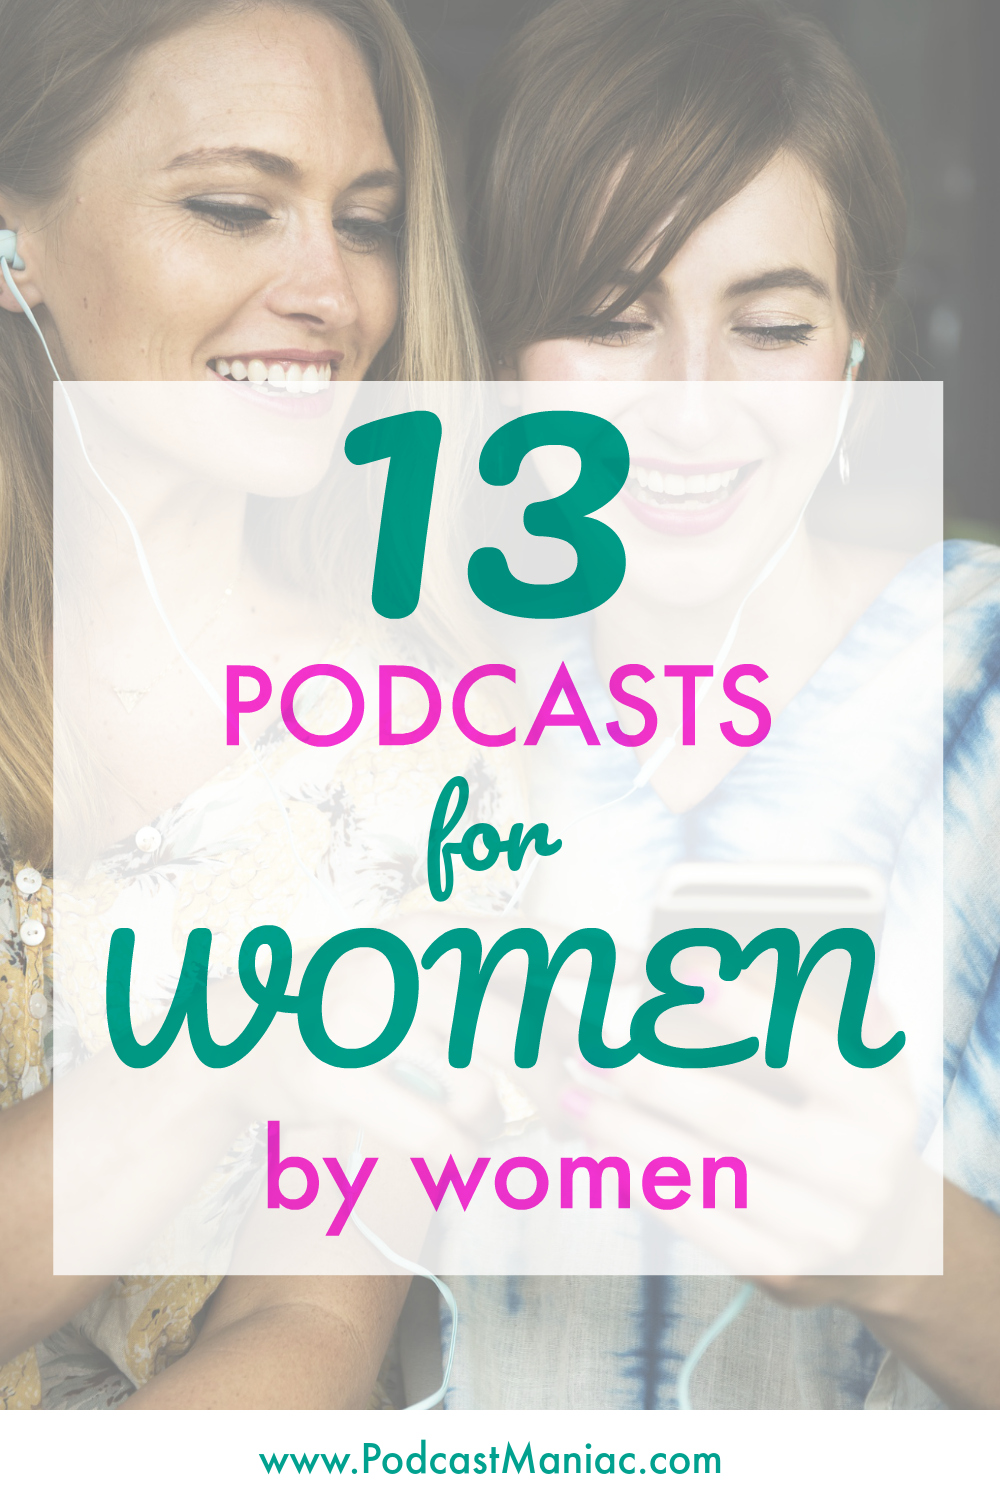 The Best Podcasts for Women, Made by Women Podcast Maniac